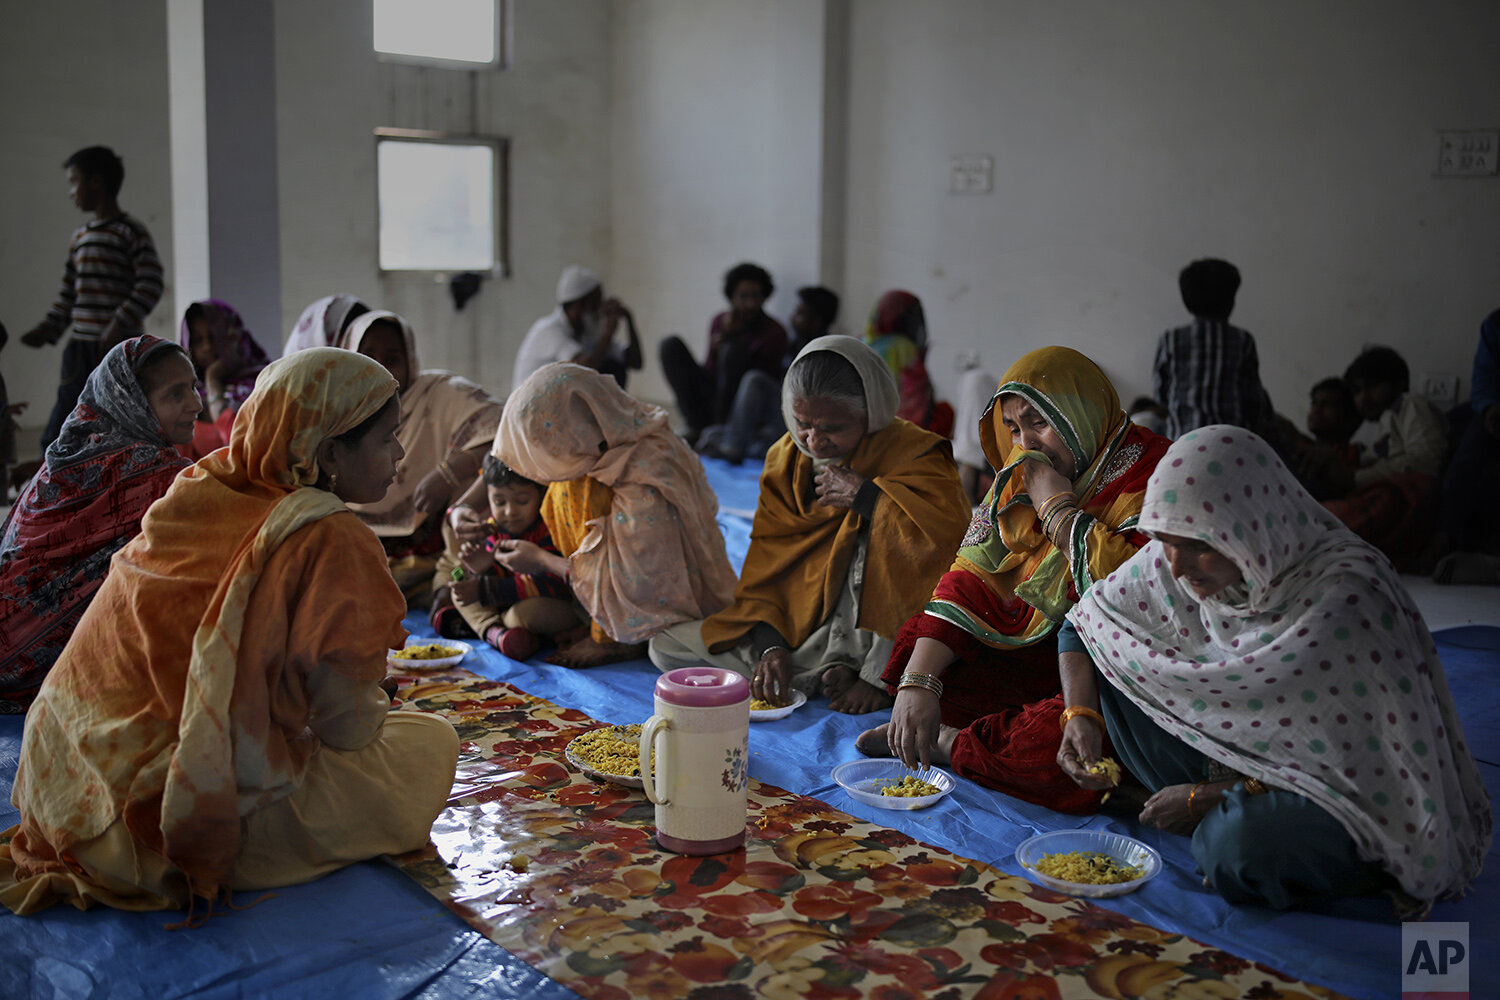  In this Friday, Feb. 28, 2020 photo, Muslim women, who were rescued after their homes were attacked by a marauding Hindu mob, sob while eating a meal inside a hall which doubles as a shelter at Al-Hind hospital in Old Mustafabad neighborhood of New 